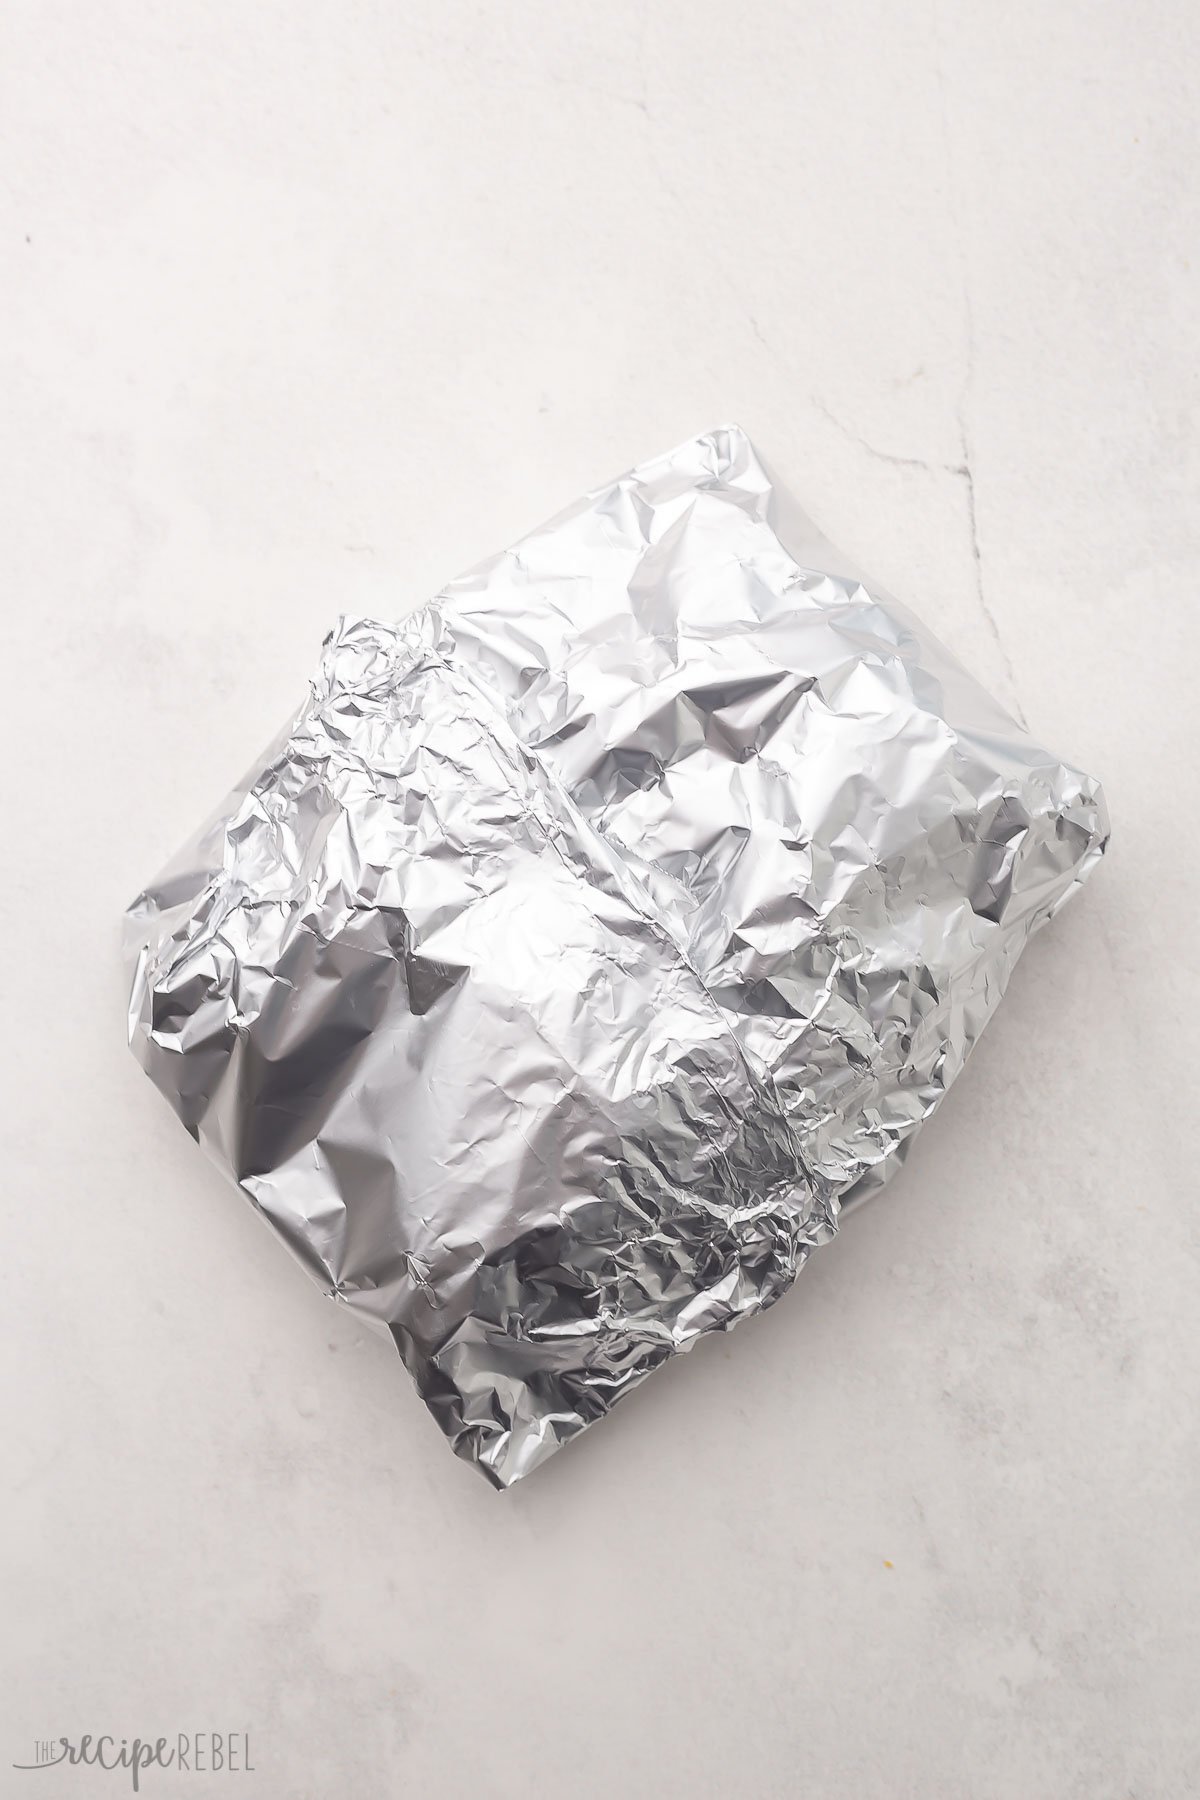 a closed foil pack on a grey surface.